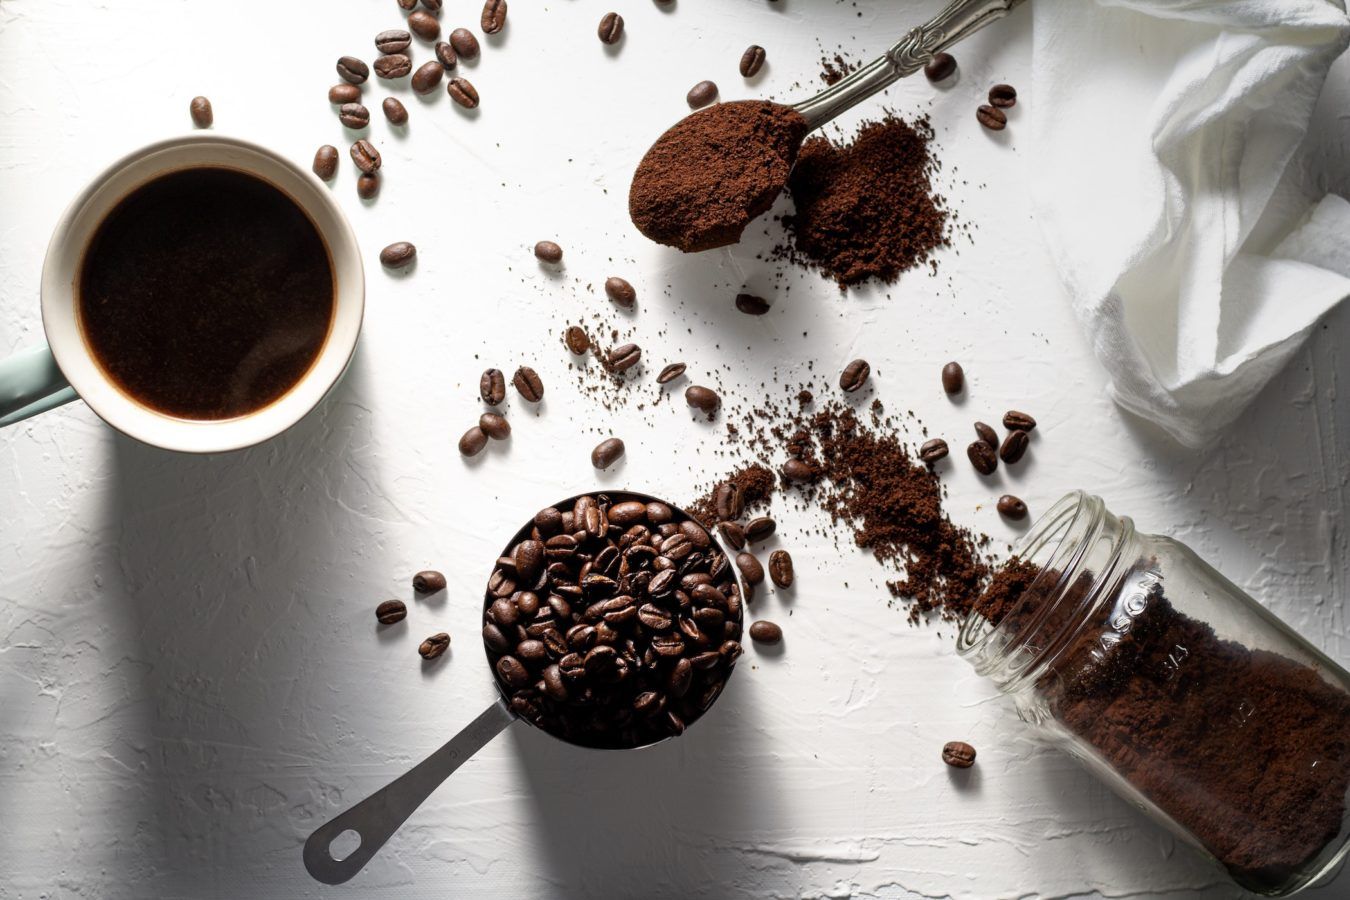 Bad news, the World’s Coffee Bean Reserves are at their Lowest since Y2K